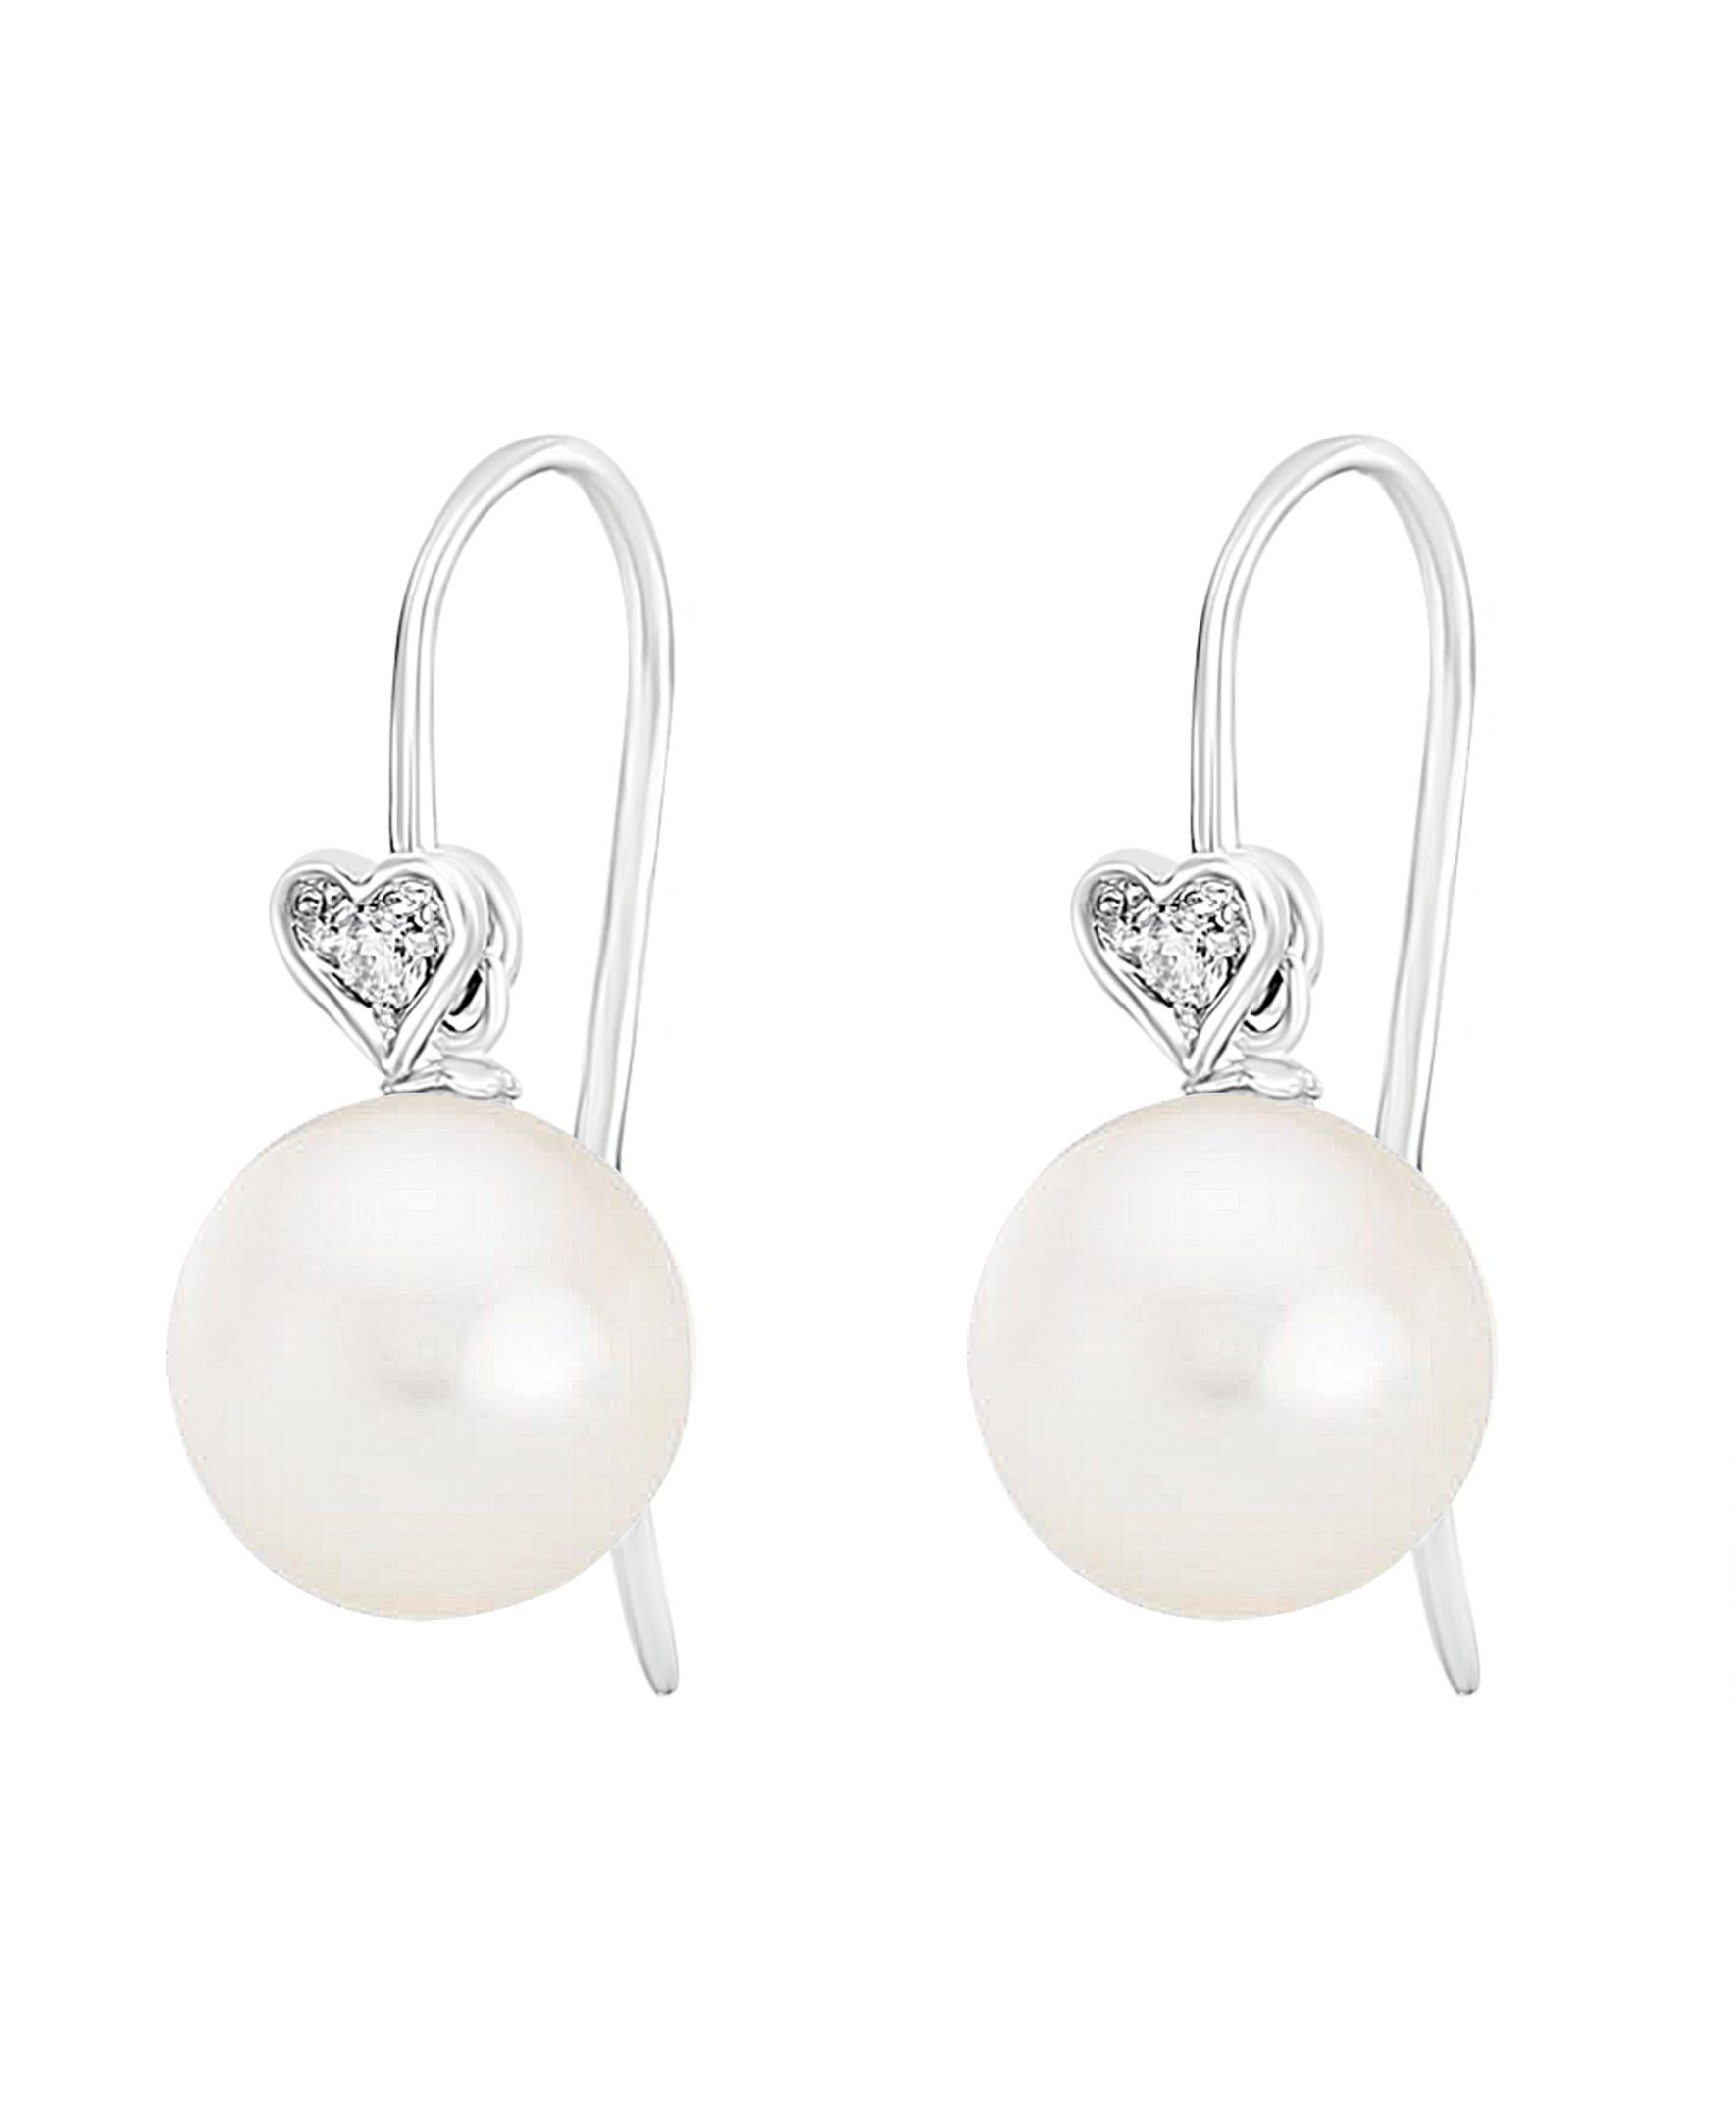 These elegant Diamond and Pearl earrings contain Chinese Freshwater round cultured pearls set on 14K white gold french wire and diamond hearts with 0.06 carats of diamonds. Simple, yet elegant, these earrings are a great addition to any